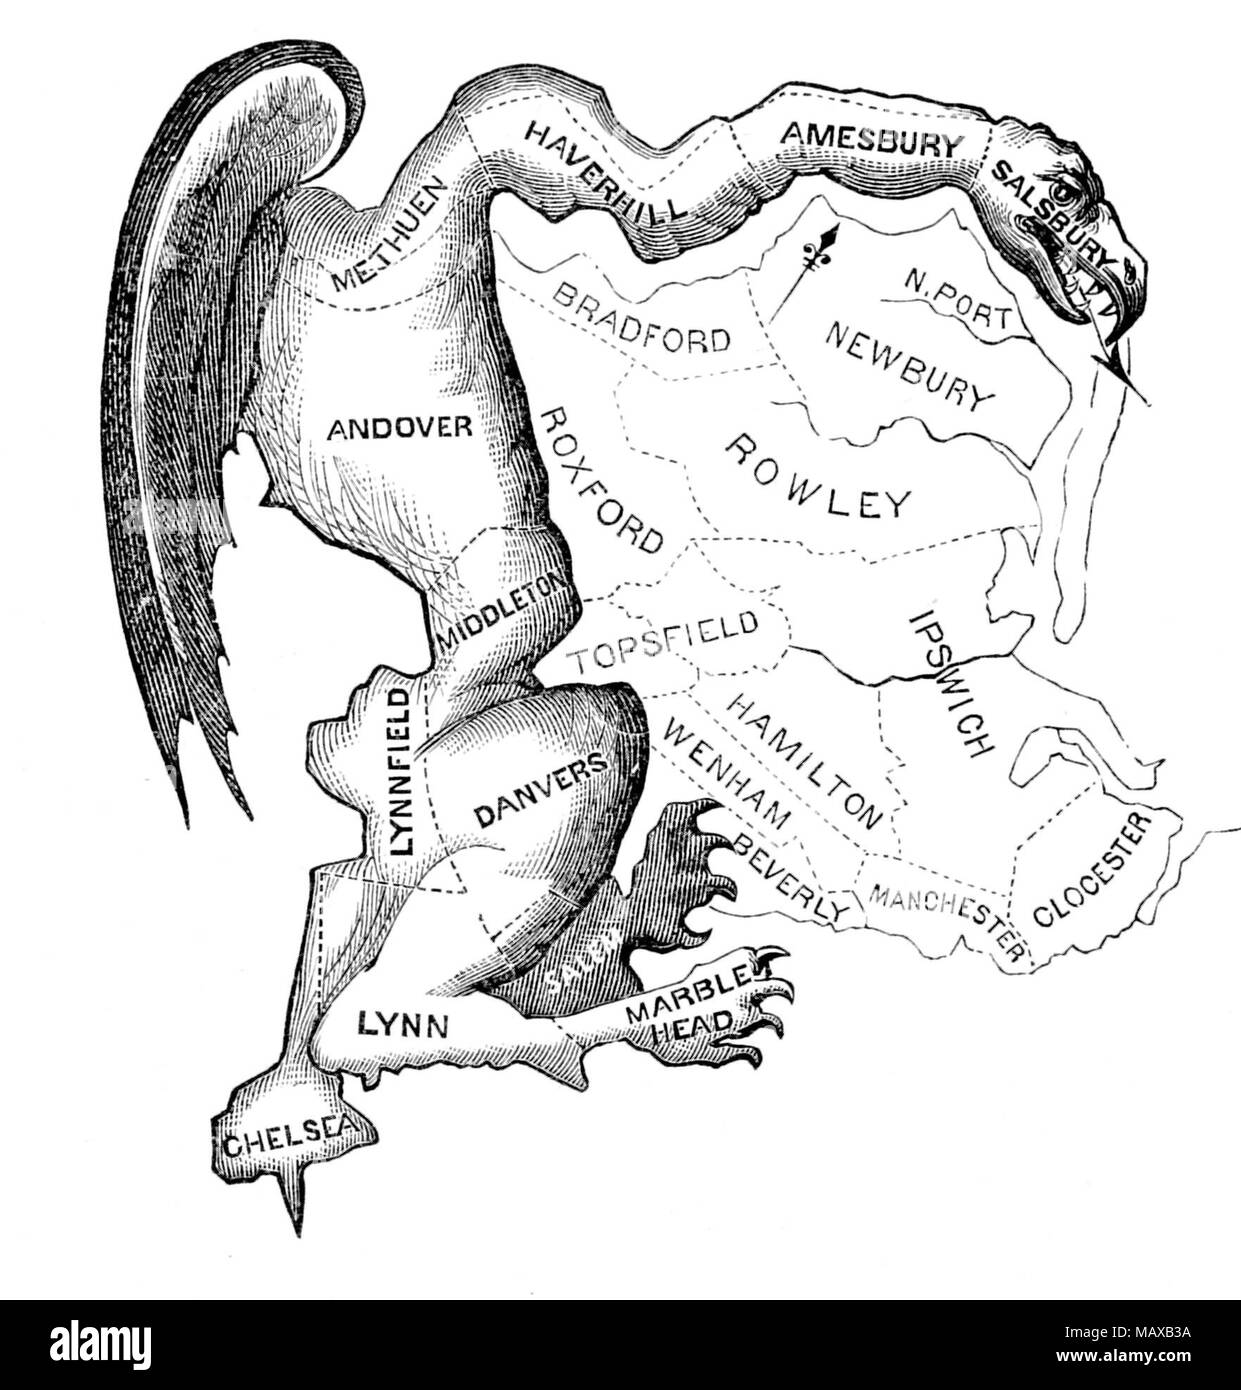 Cartoon 'The Gerry-Mander' by Elkanah Tisdale (1771-1835). This is the political cartoon that led to the coining of the term “Gerrymander.” The district depicted in the cartoon was created by Massachusetts legislature to favor the incumbent Democratic-Republican party candidates of Governor Elbridge Gerry over the Federalists in 1812.  Originally published in the Boston Centinel, 1812. Stock Photo